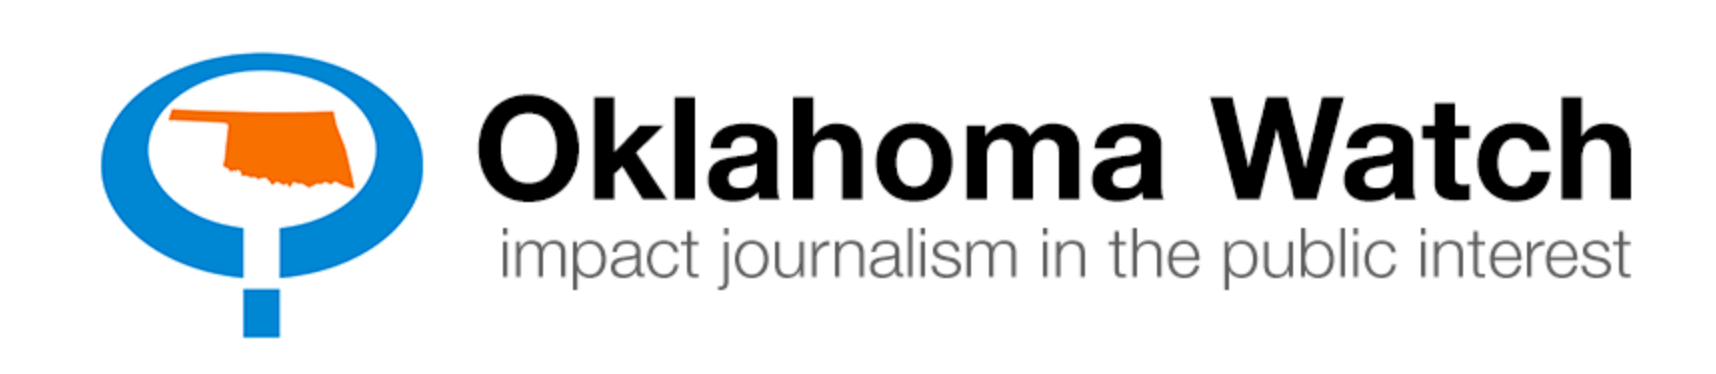 Website for Oklahoma Watch